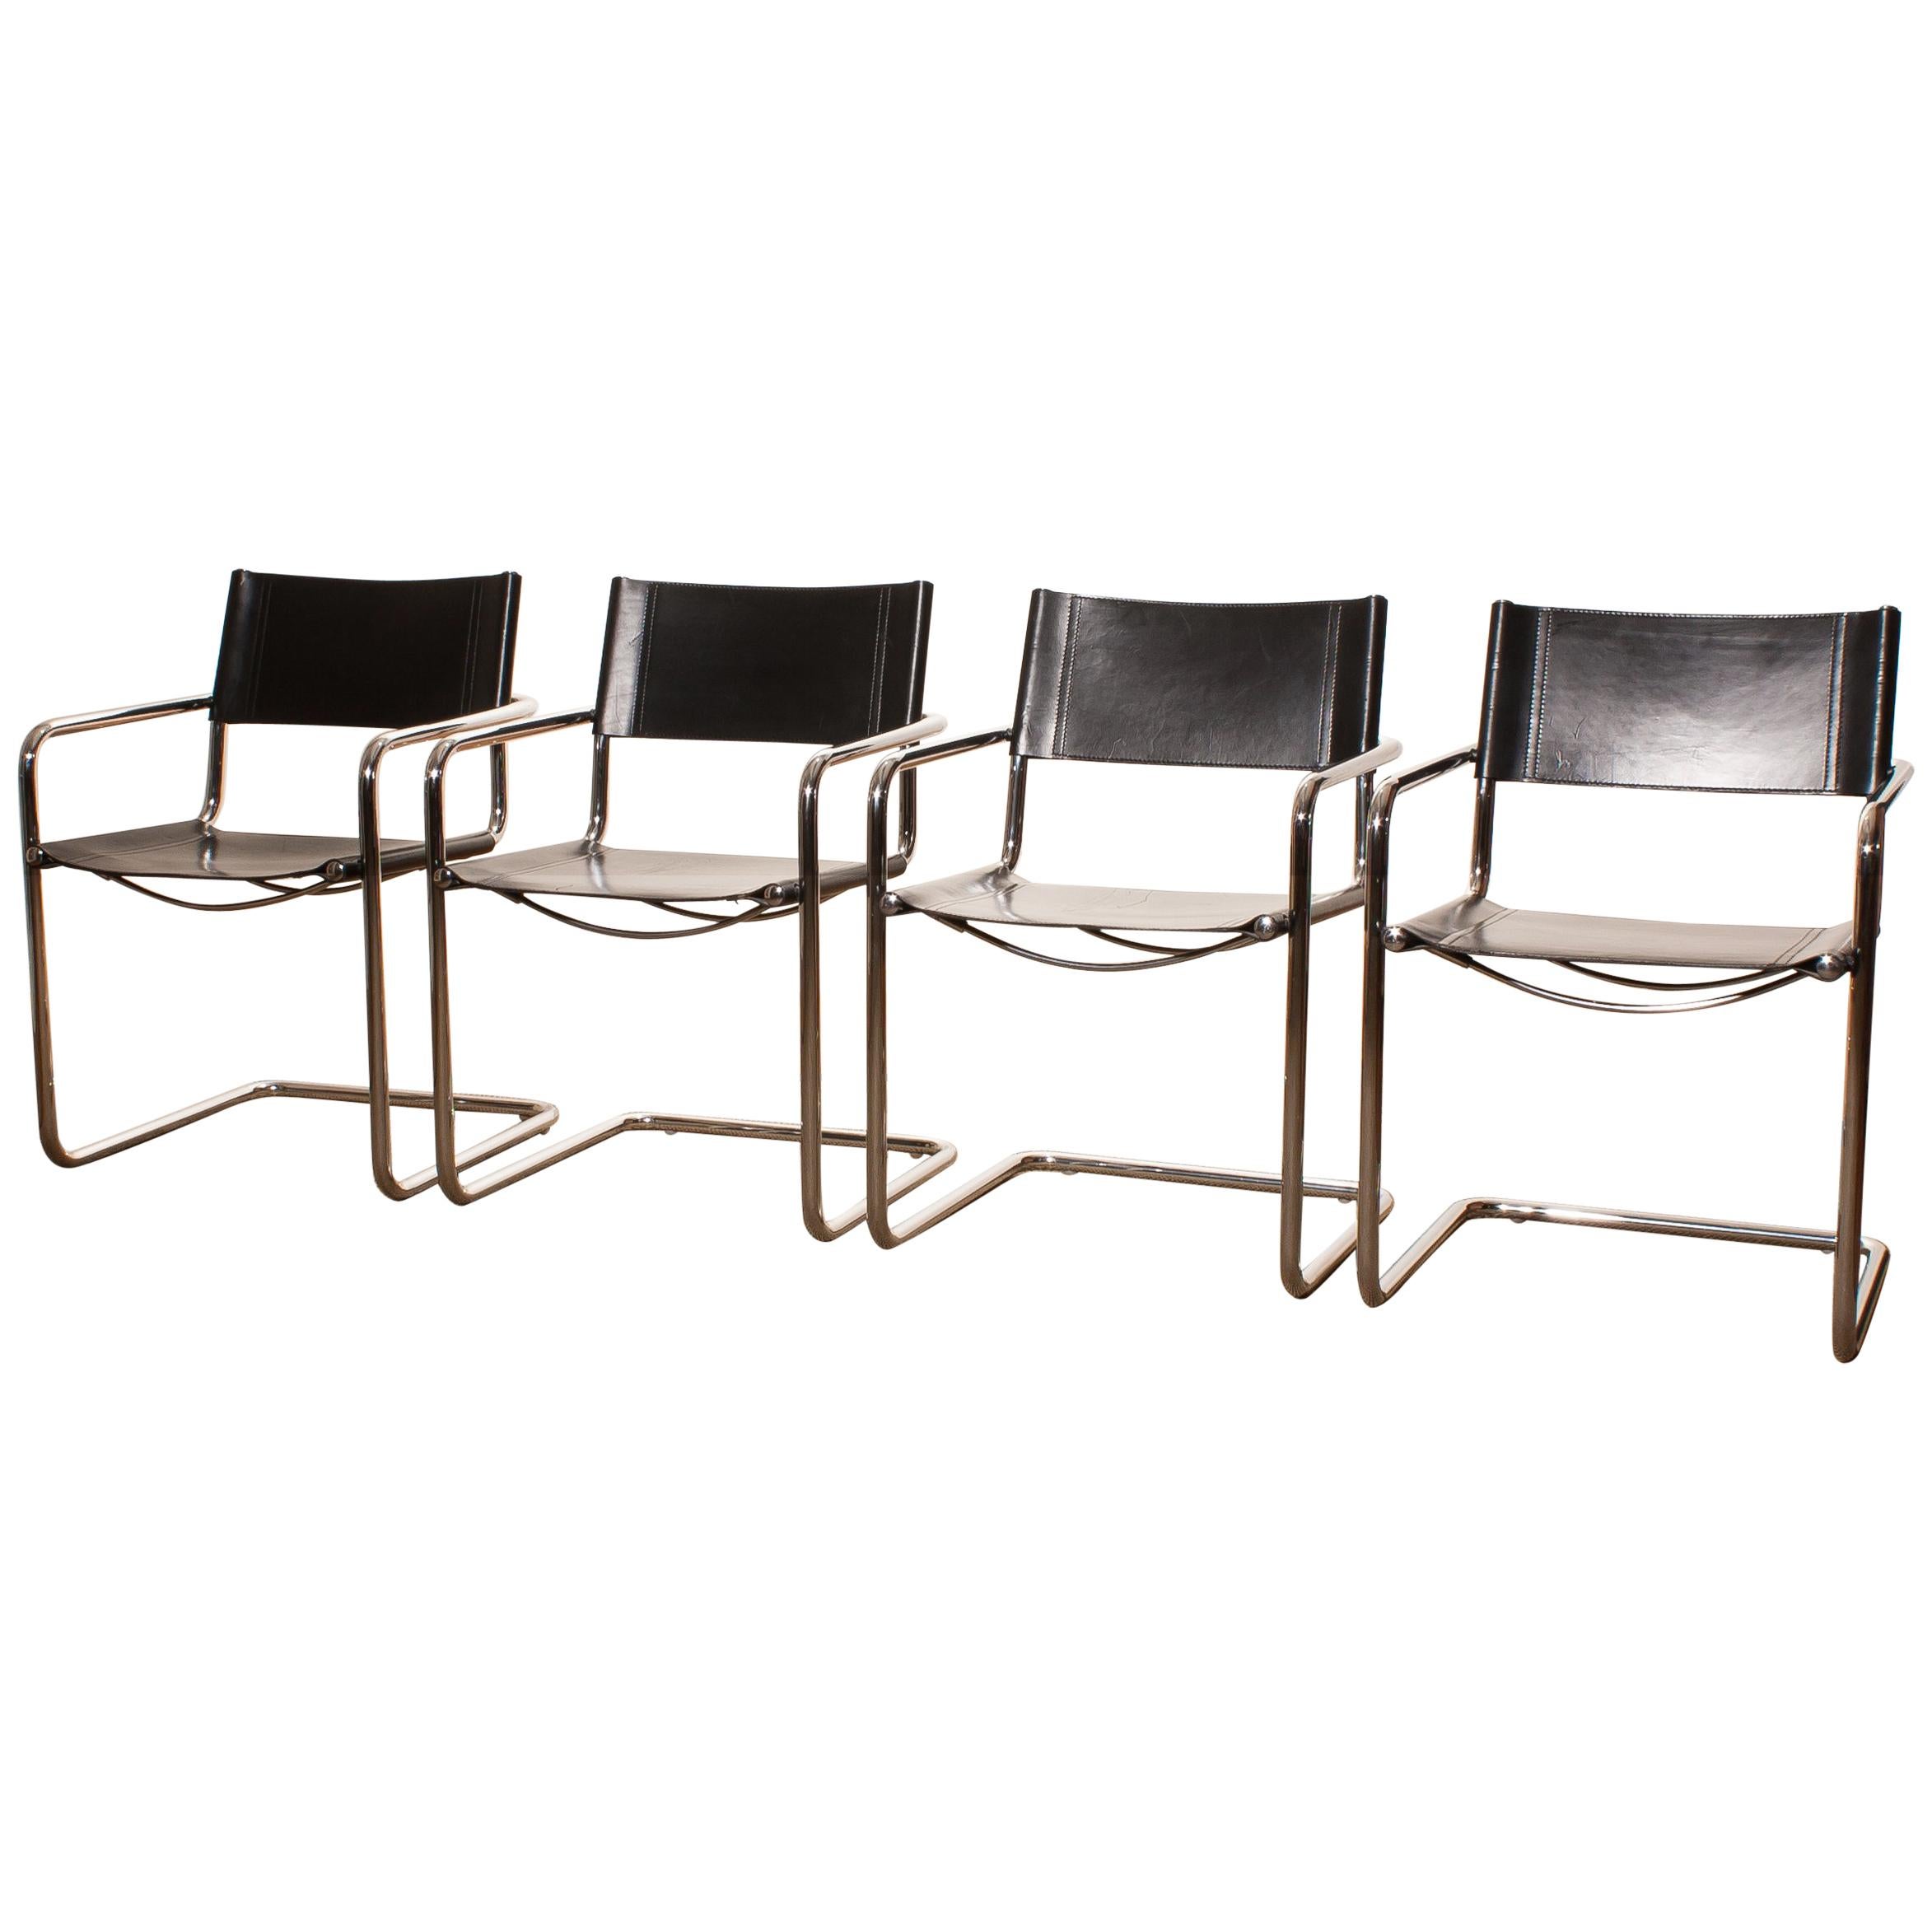 Tubular Steel Chrome and Sturdy Black Leather Dining Chairs by Matteo Grassi